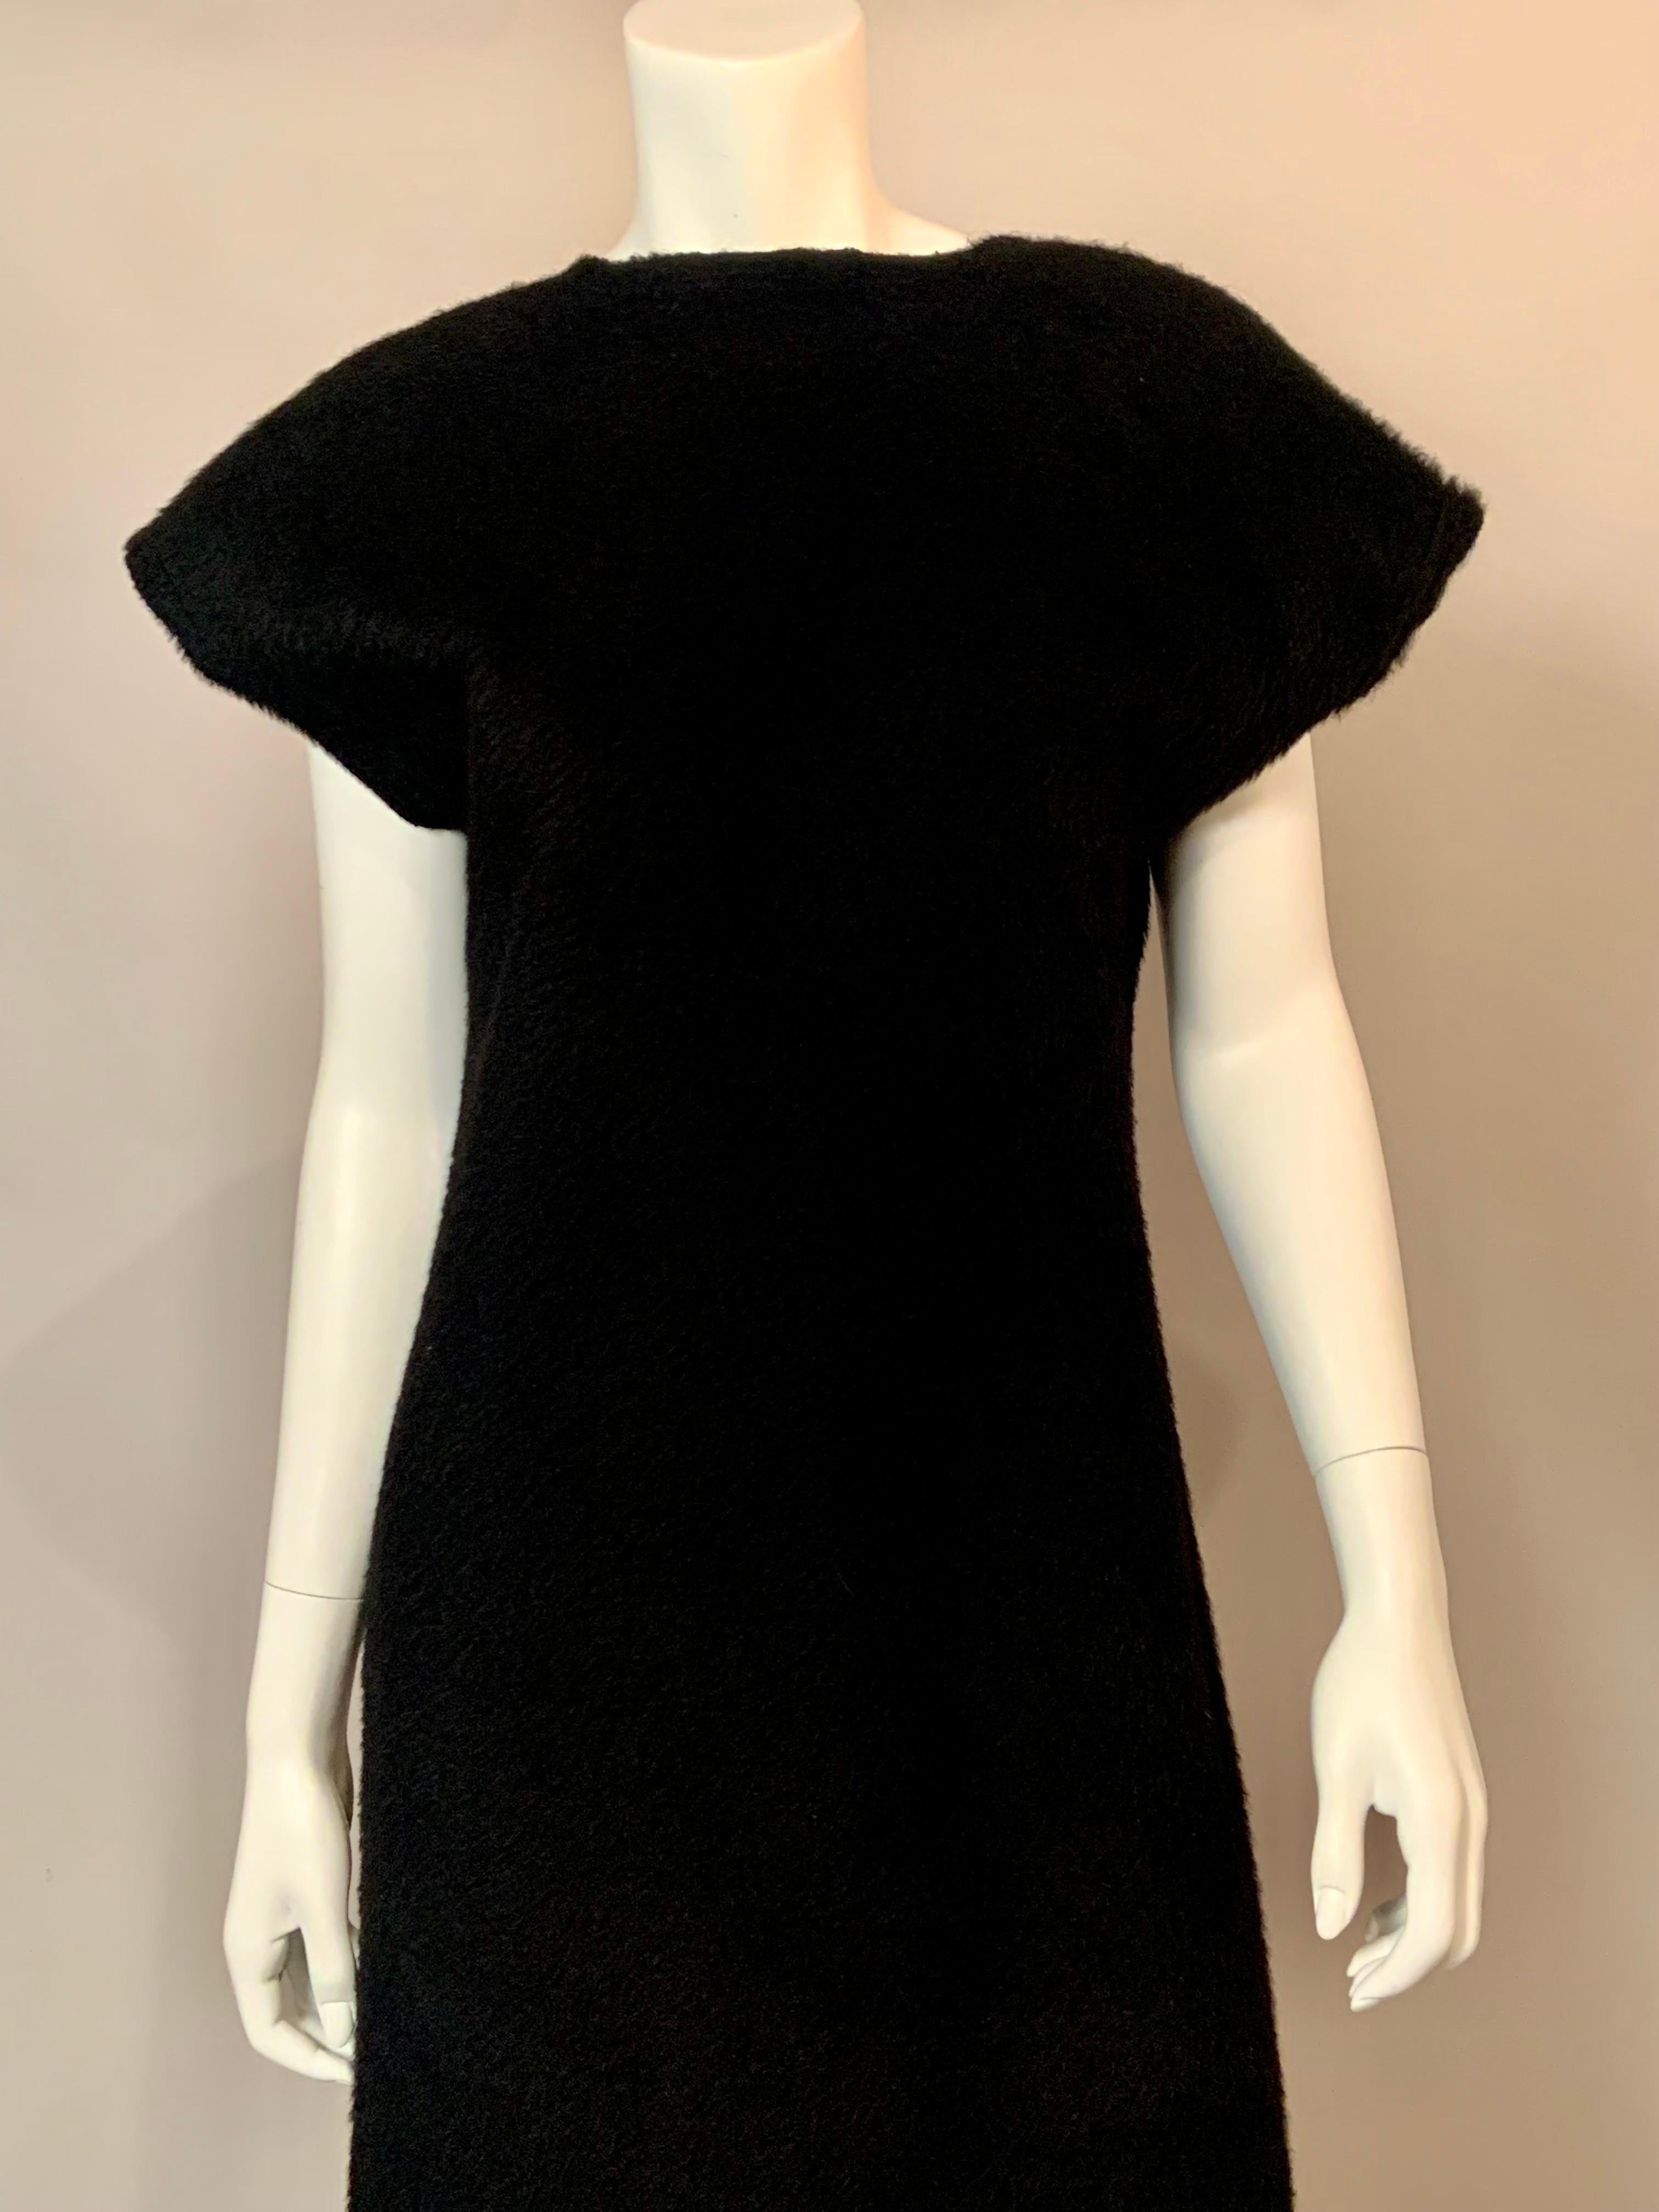 A sleek and modern dress from Comme des Garcons, this piece can be dressed up for evening or accessorized casually for day wear.
The fabric is quite plush,  [no content tag remains],  and adds to the elegance and versatility of the dress.  A simple